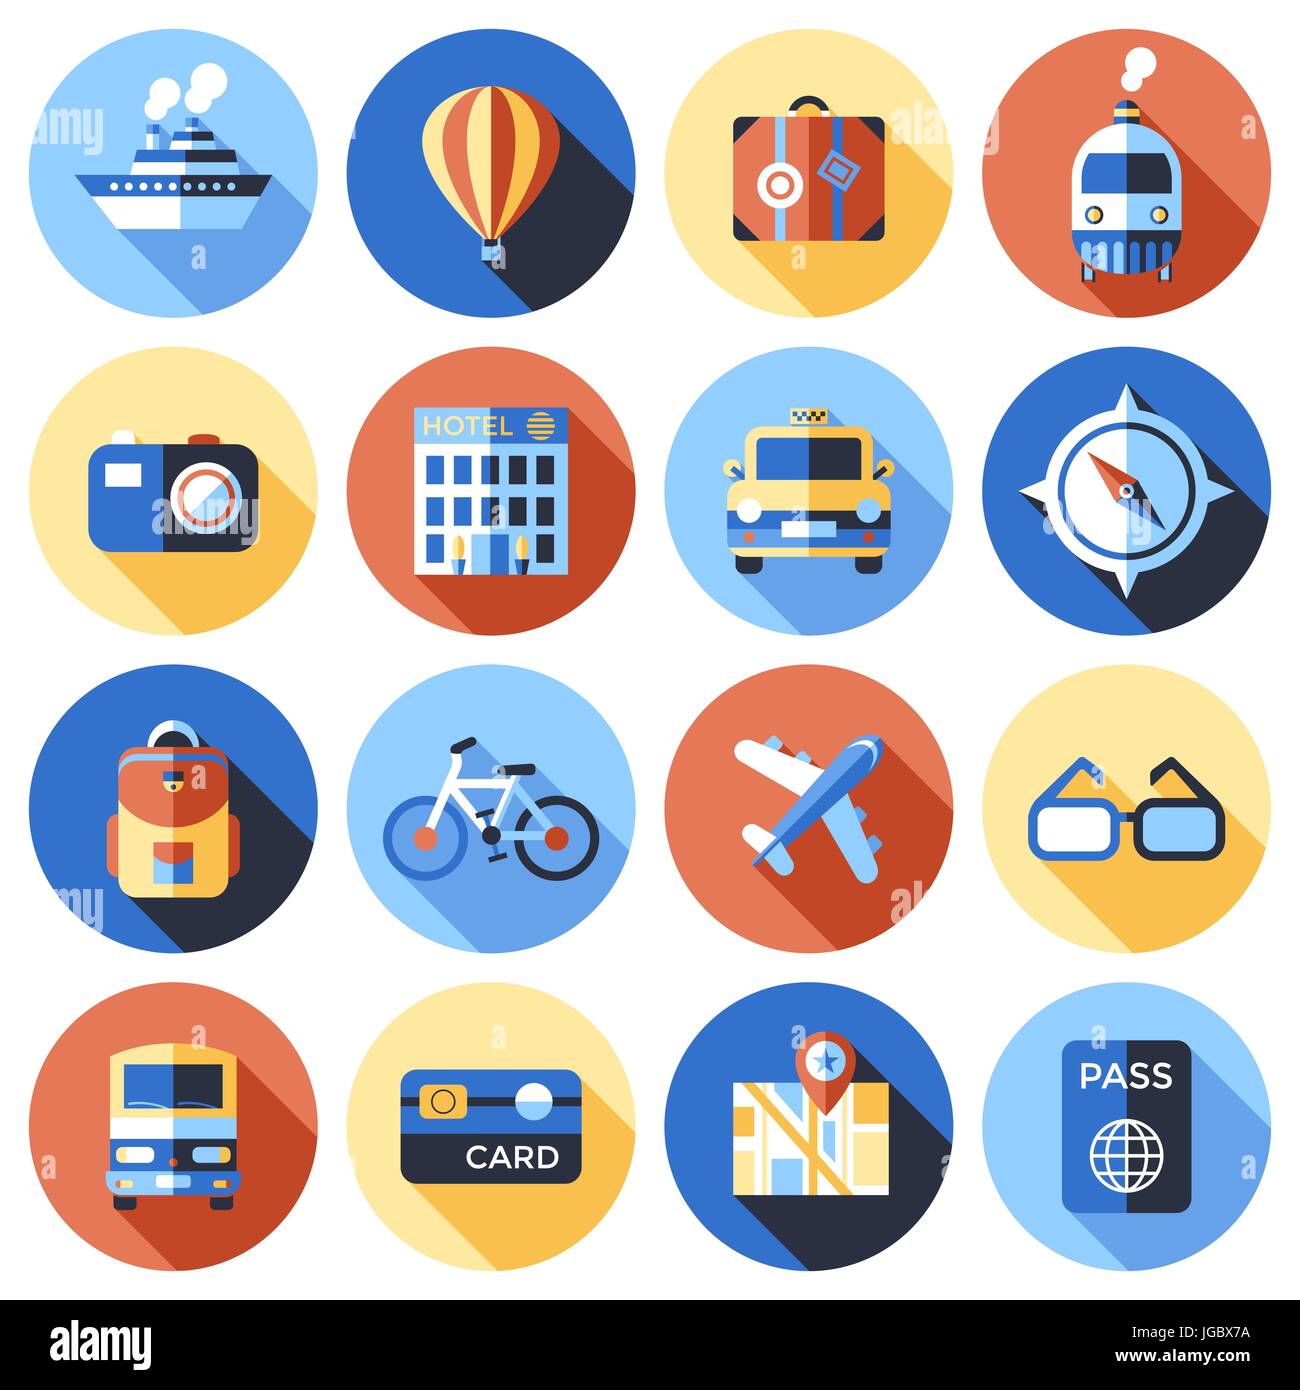 Digital vector blue red travel icons set with drawn simple line art info graphic poster promo, ship boat camera balloon luggage compass air plane map  Stock Vector